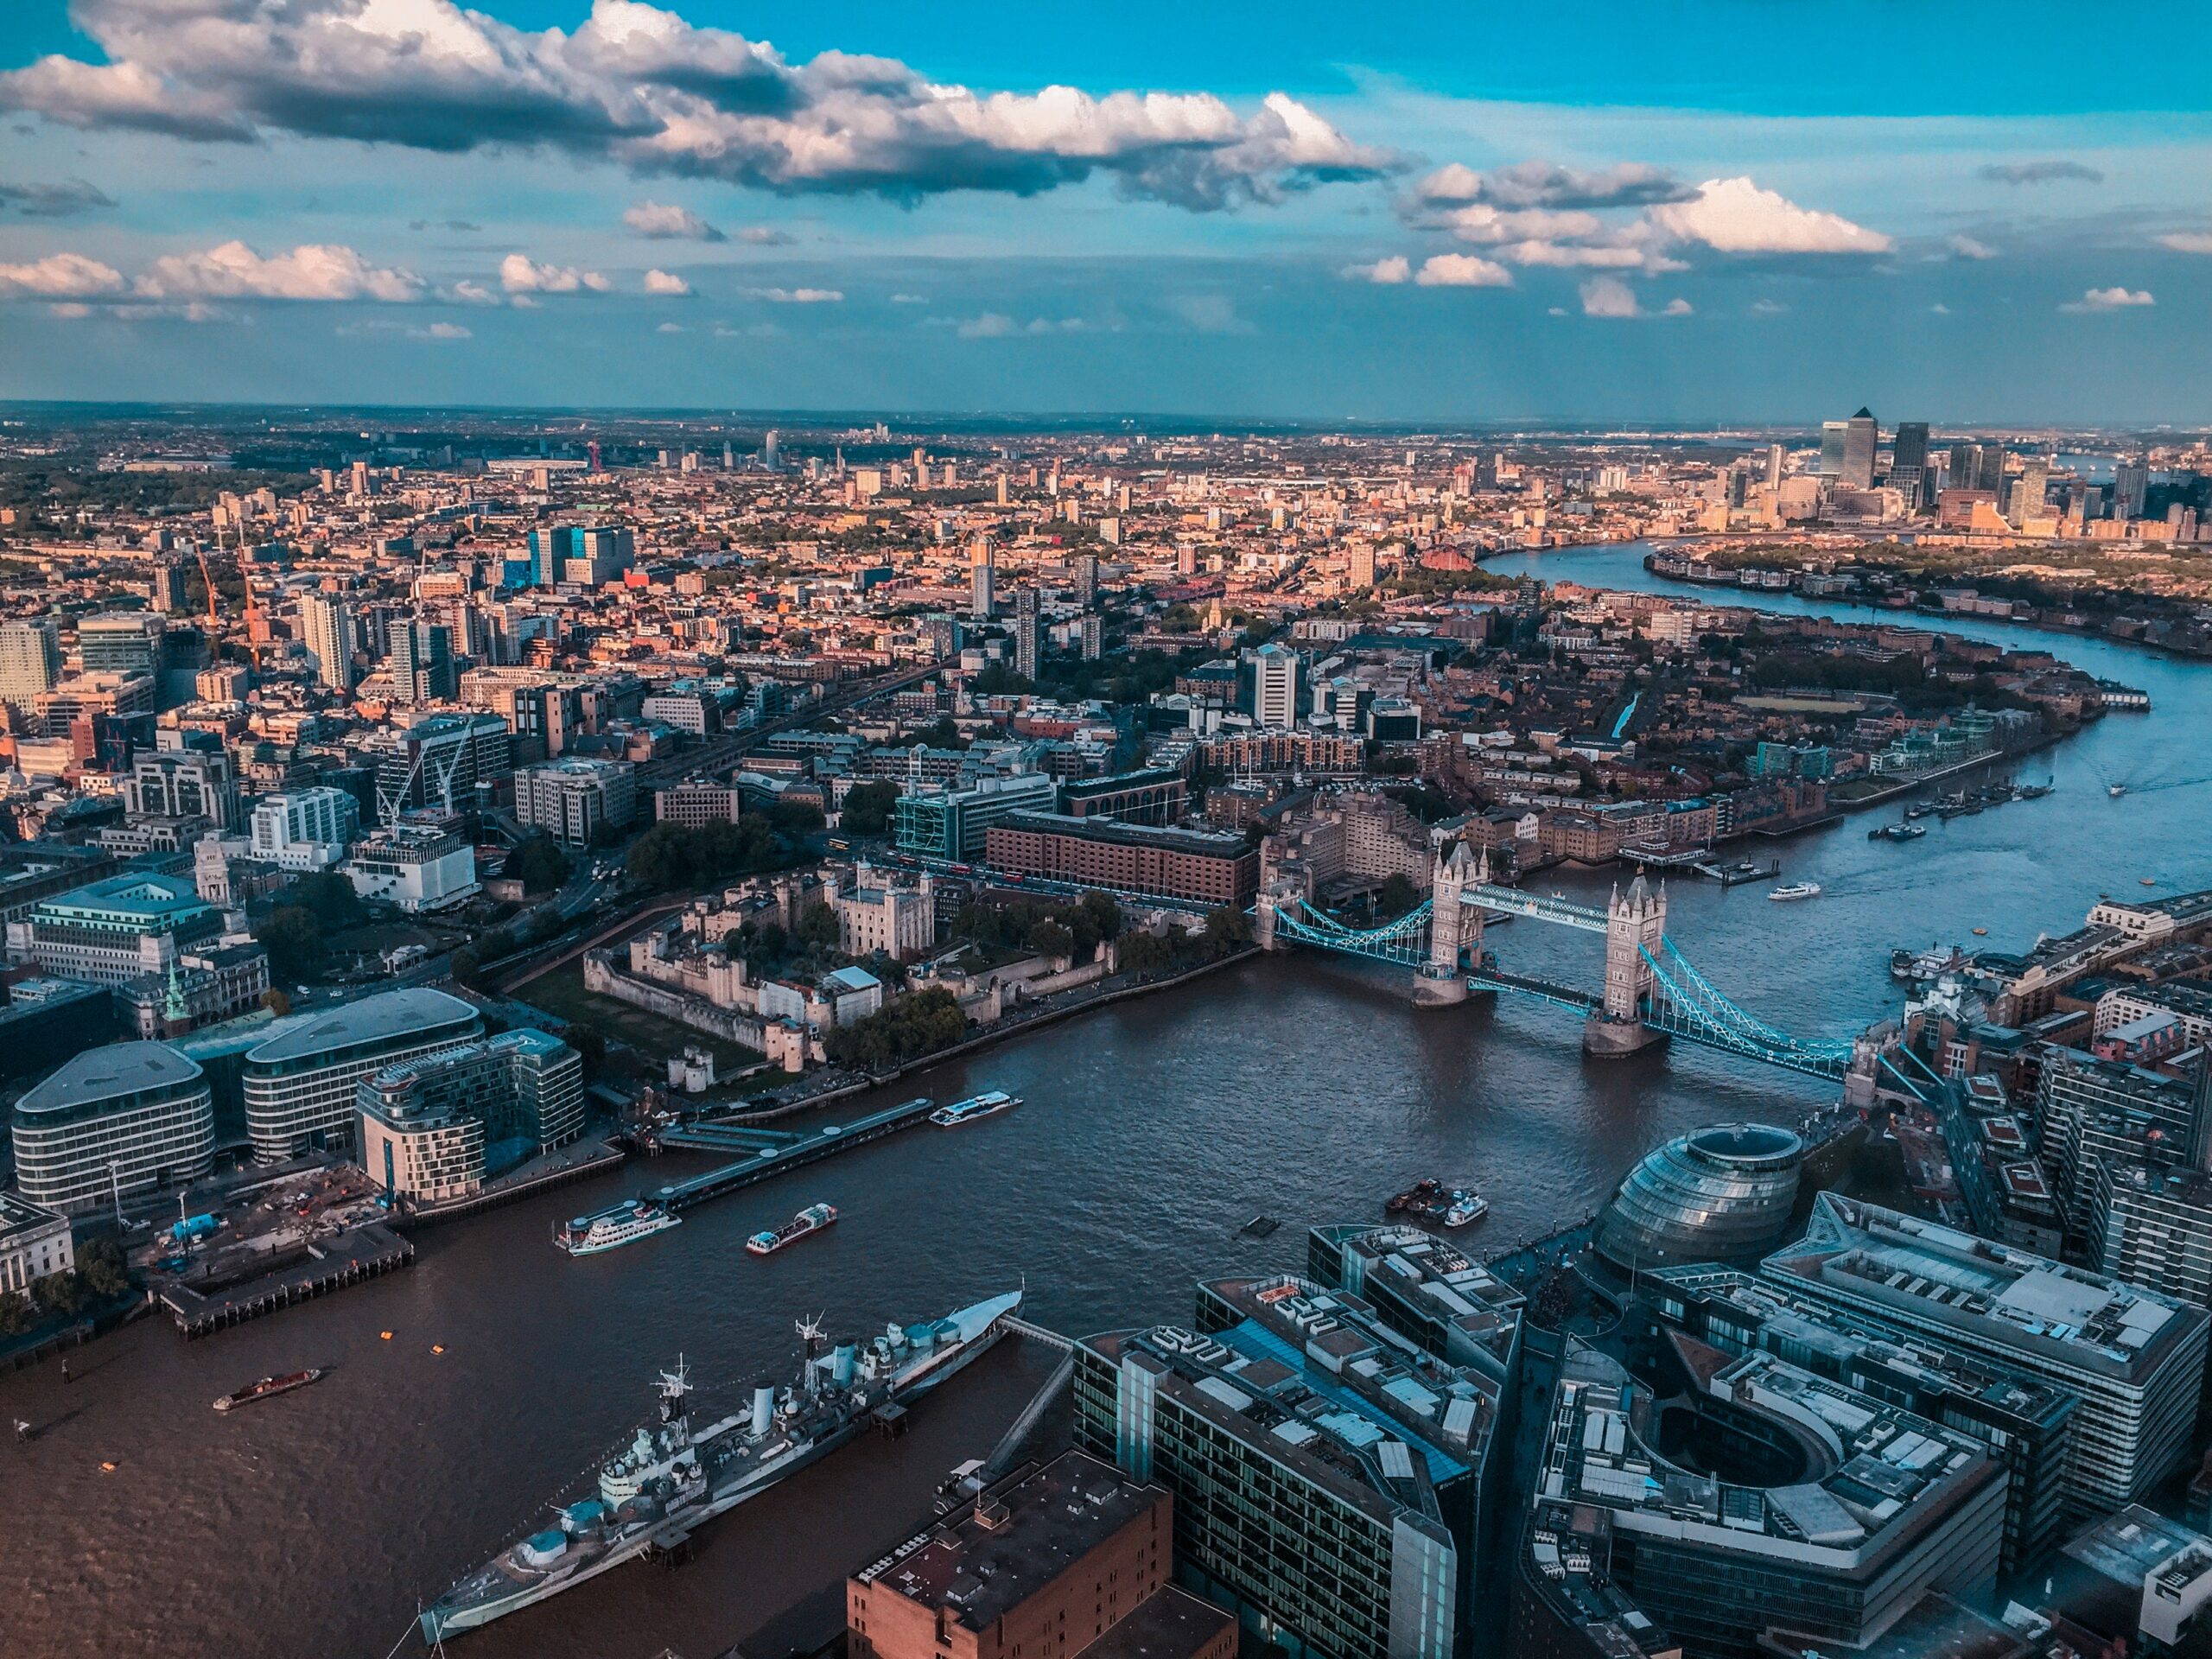 Drone image of London